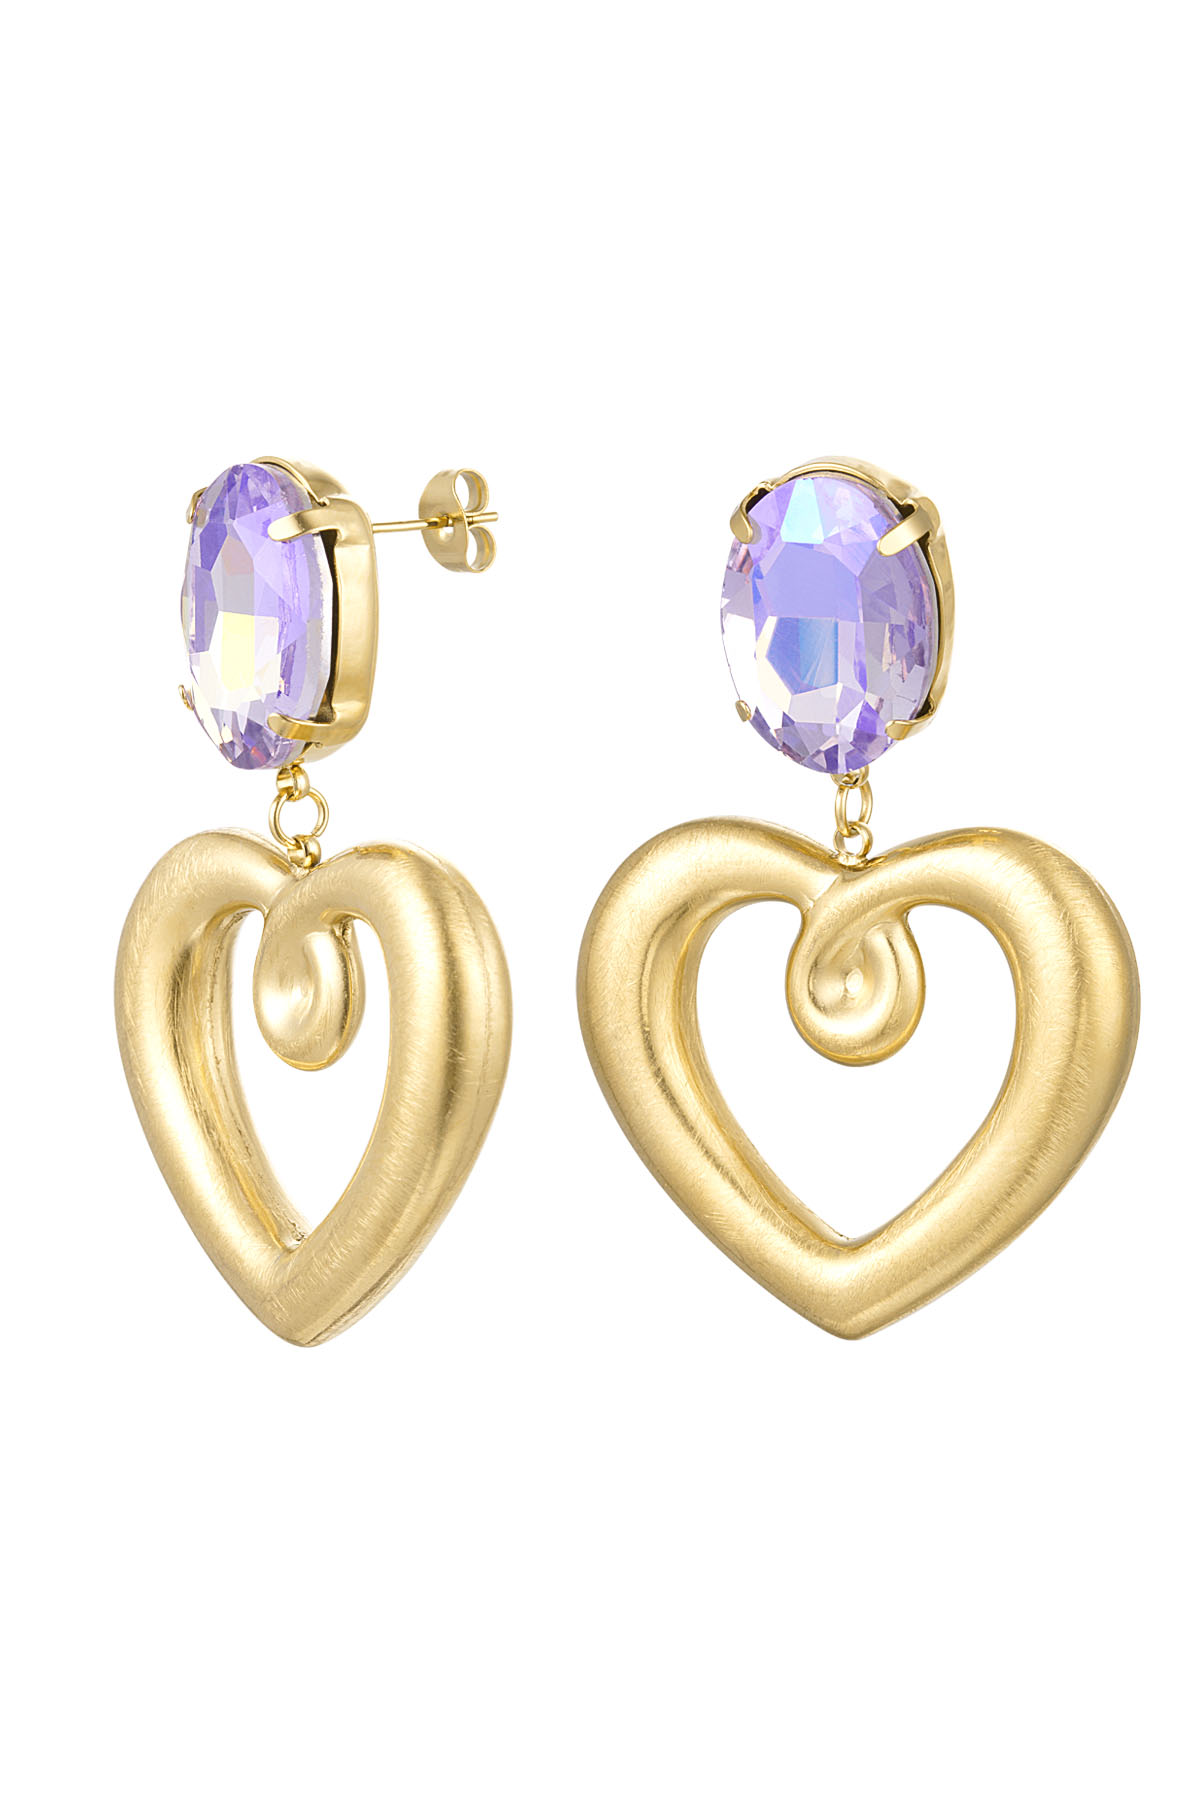 Earrings heart with glass beads - gold Stainless Steel